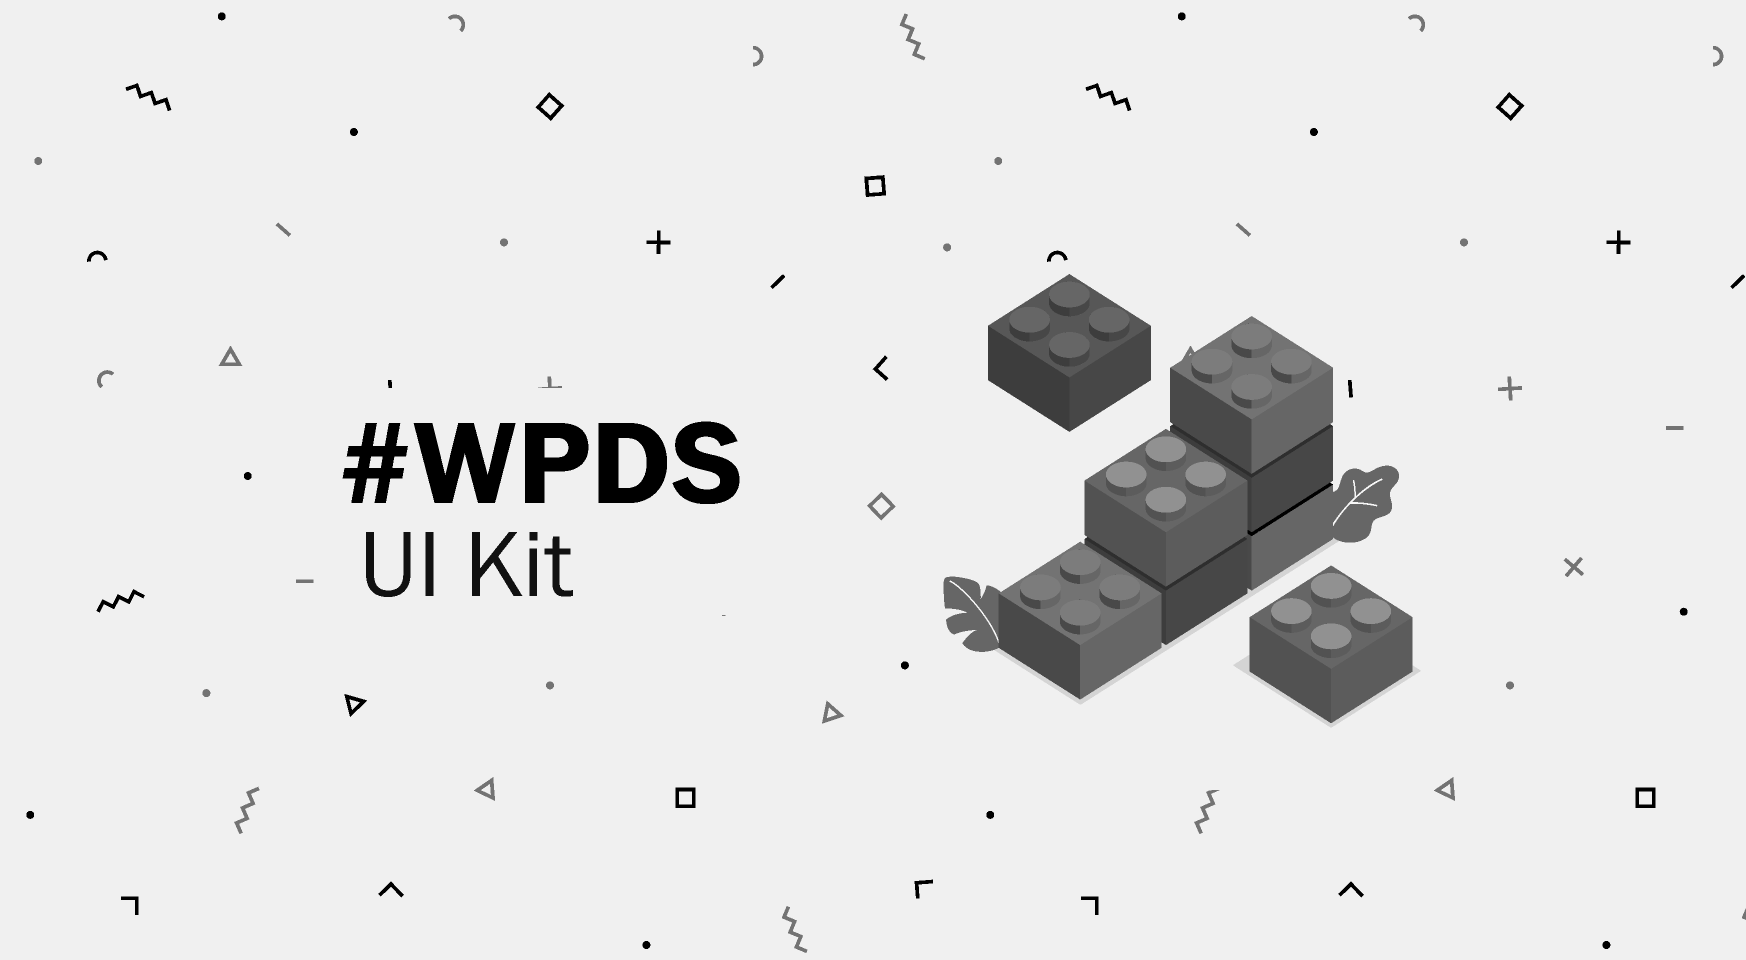 Title card reading “#WPDS UI Kit.” To the right, an isometric illustration of three-dimensional toy building blocks with two leaves attached. Background is gray scattered with various geometric shapes.